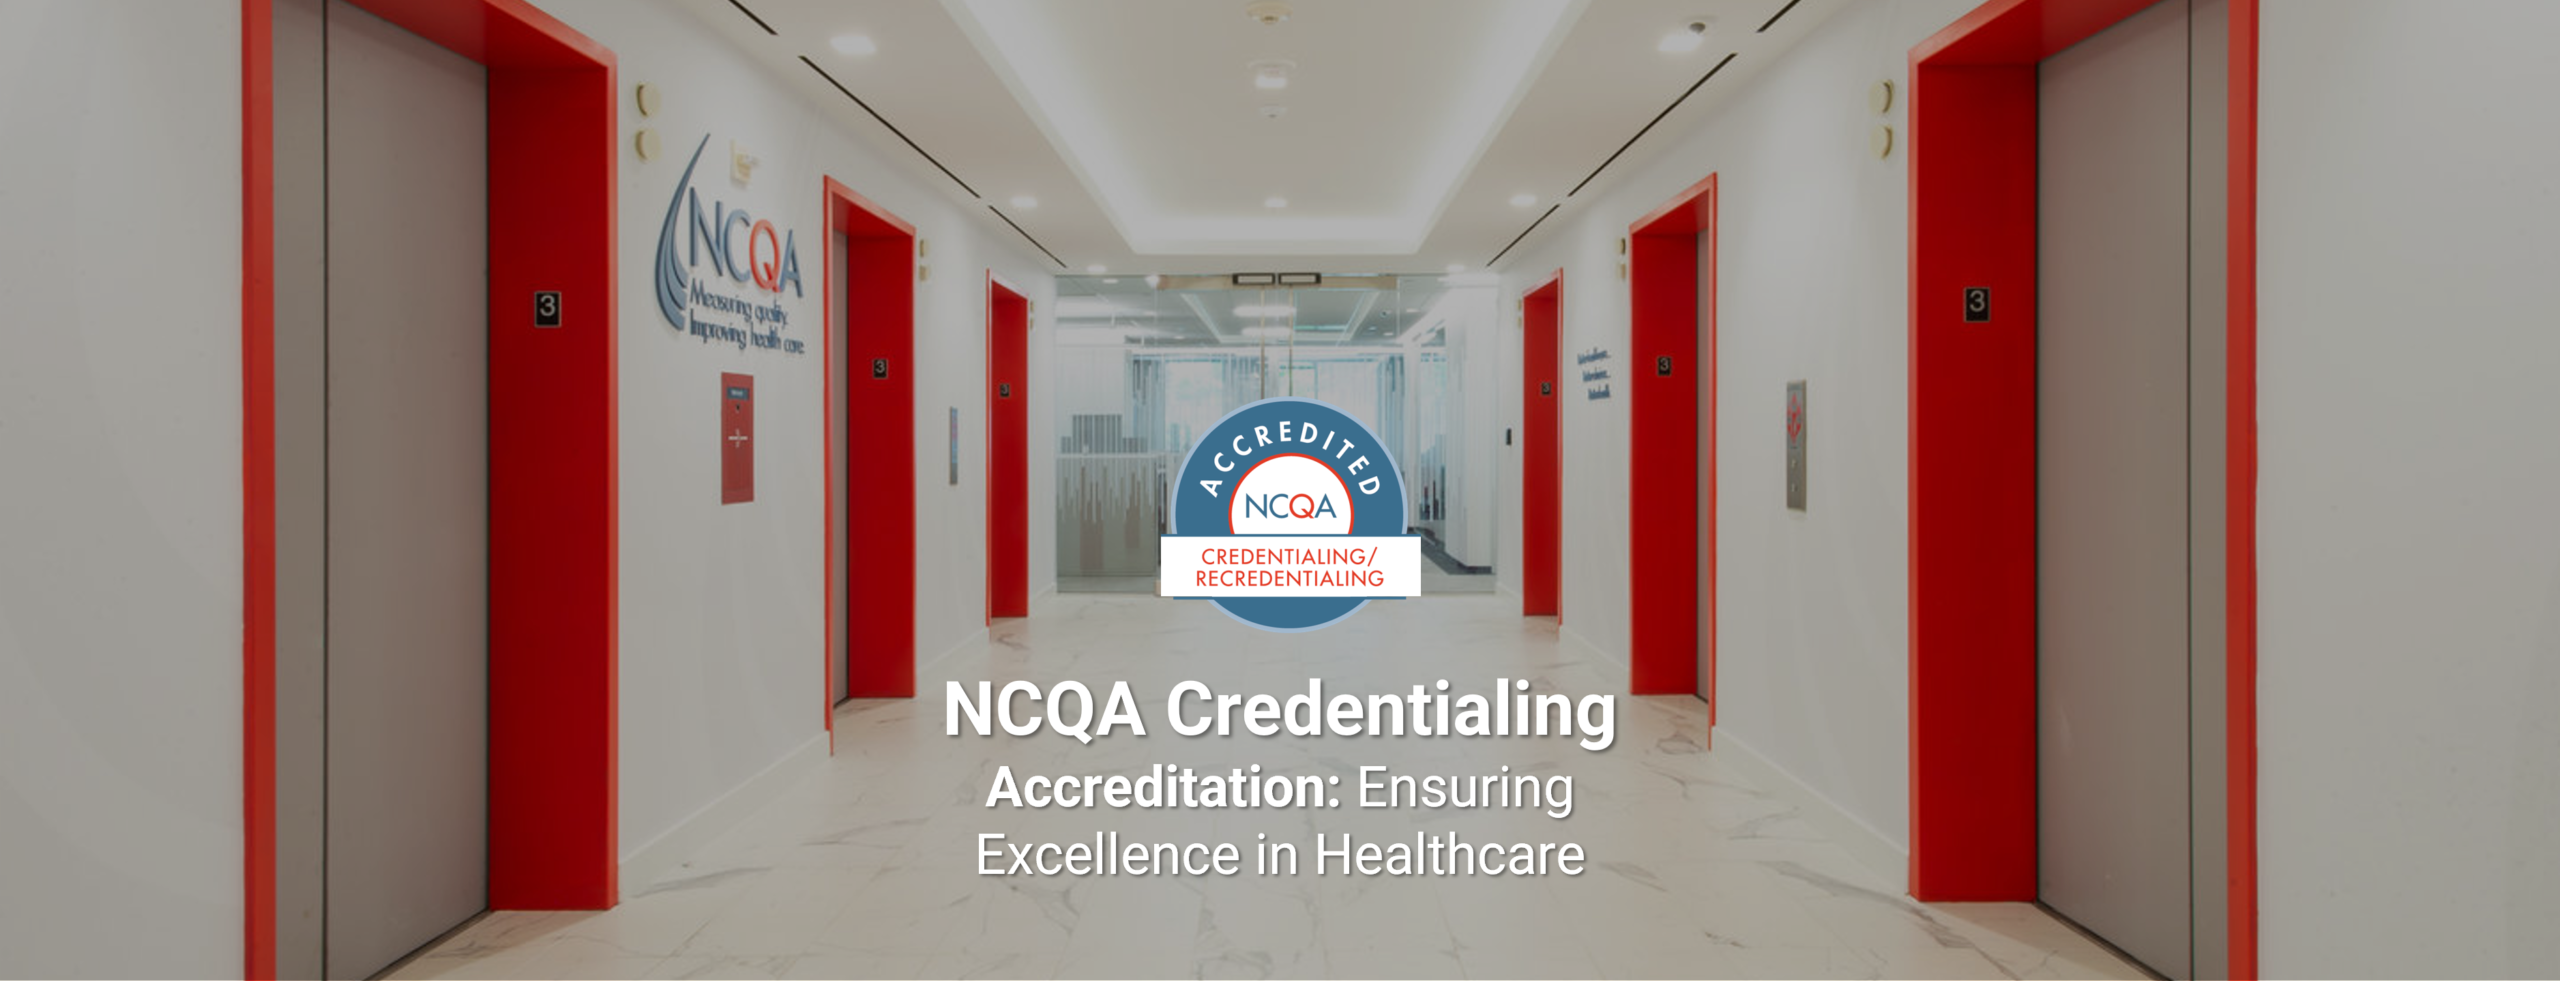 NCQA Credentialing Accreditation Ensuring Excellence in Healthcare